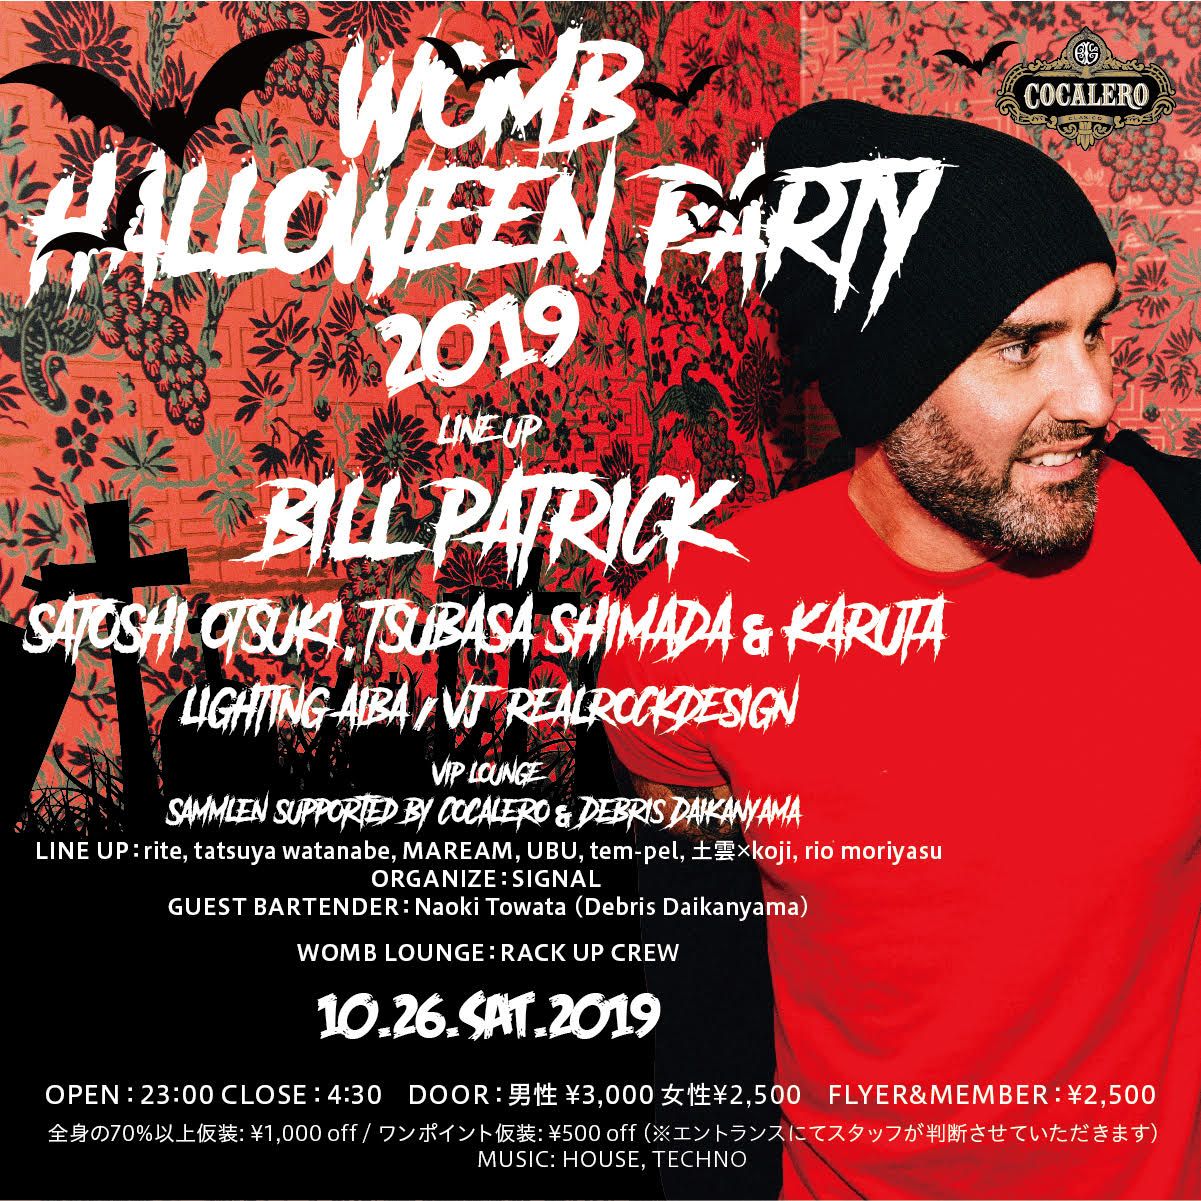 WOMB HALLOWEEN PARTY 2019 Supported by Cocalero